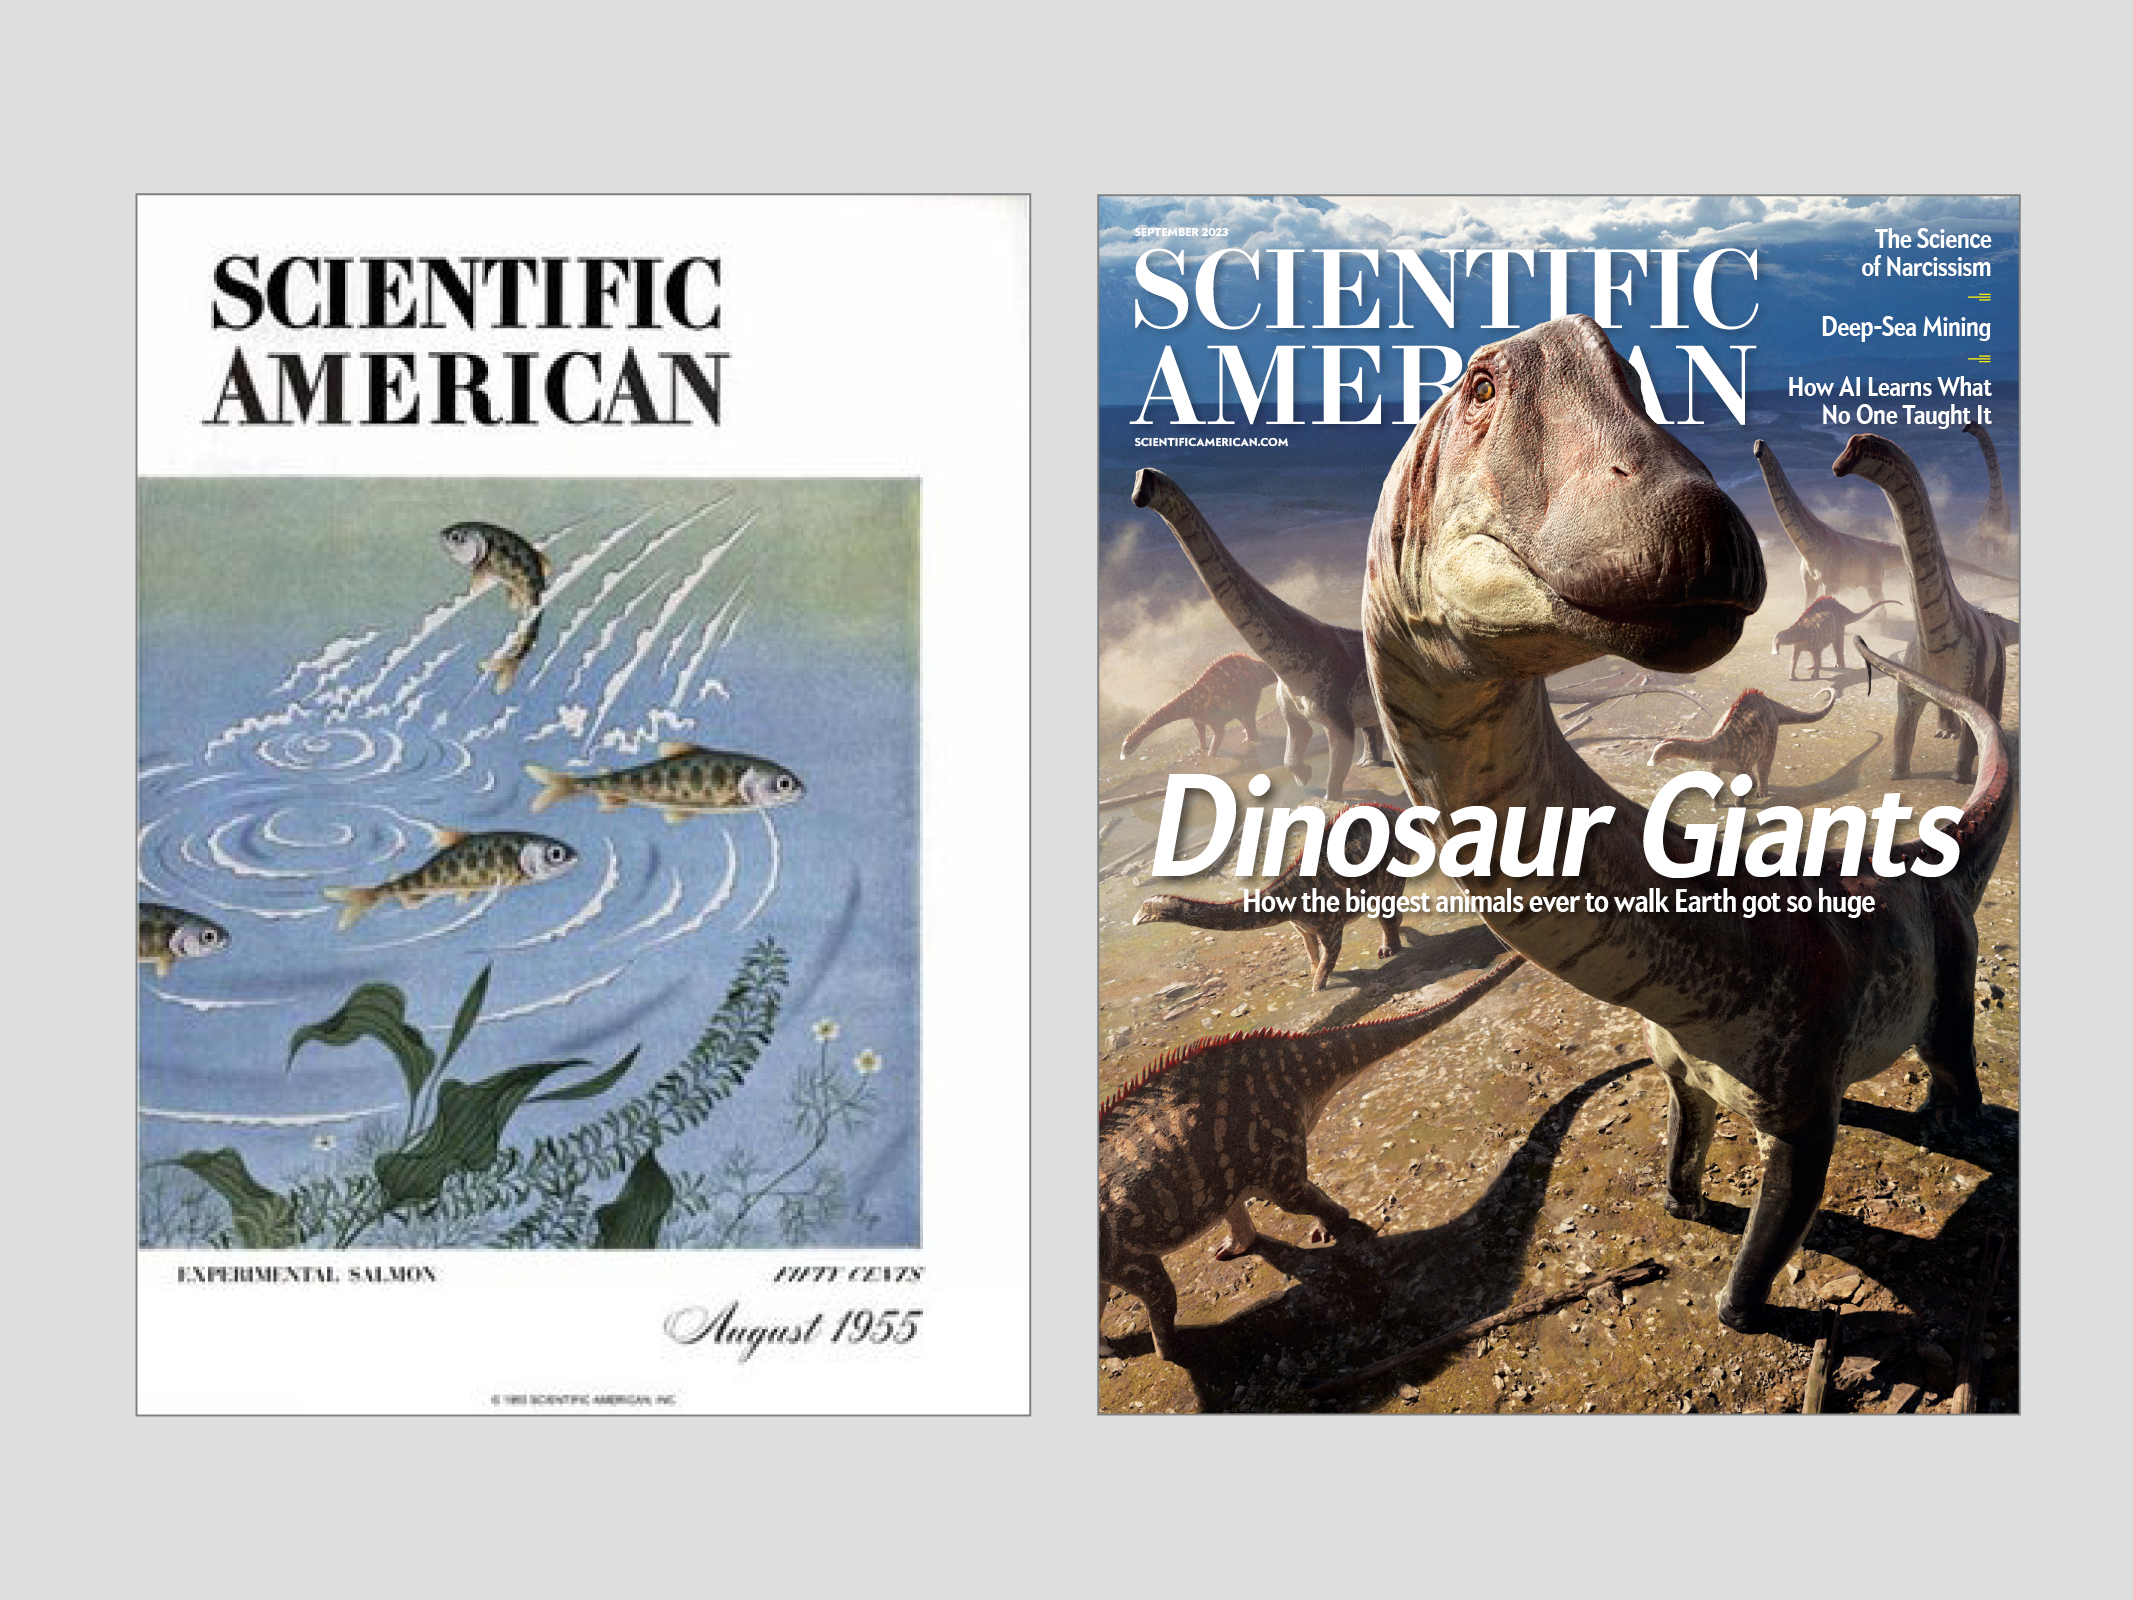 The August 1955 cover and the September 2023 covers of Scientific American.